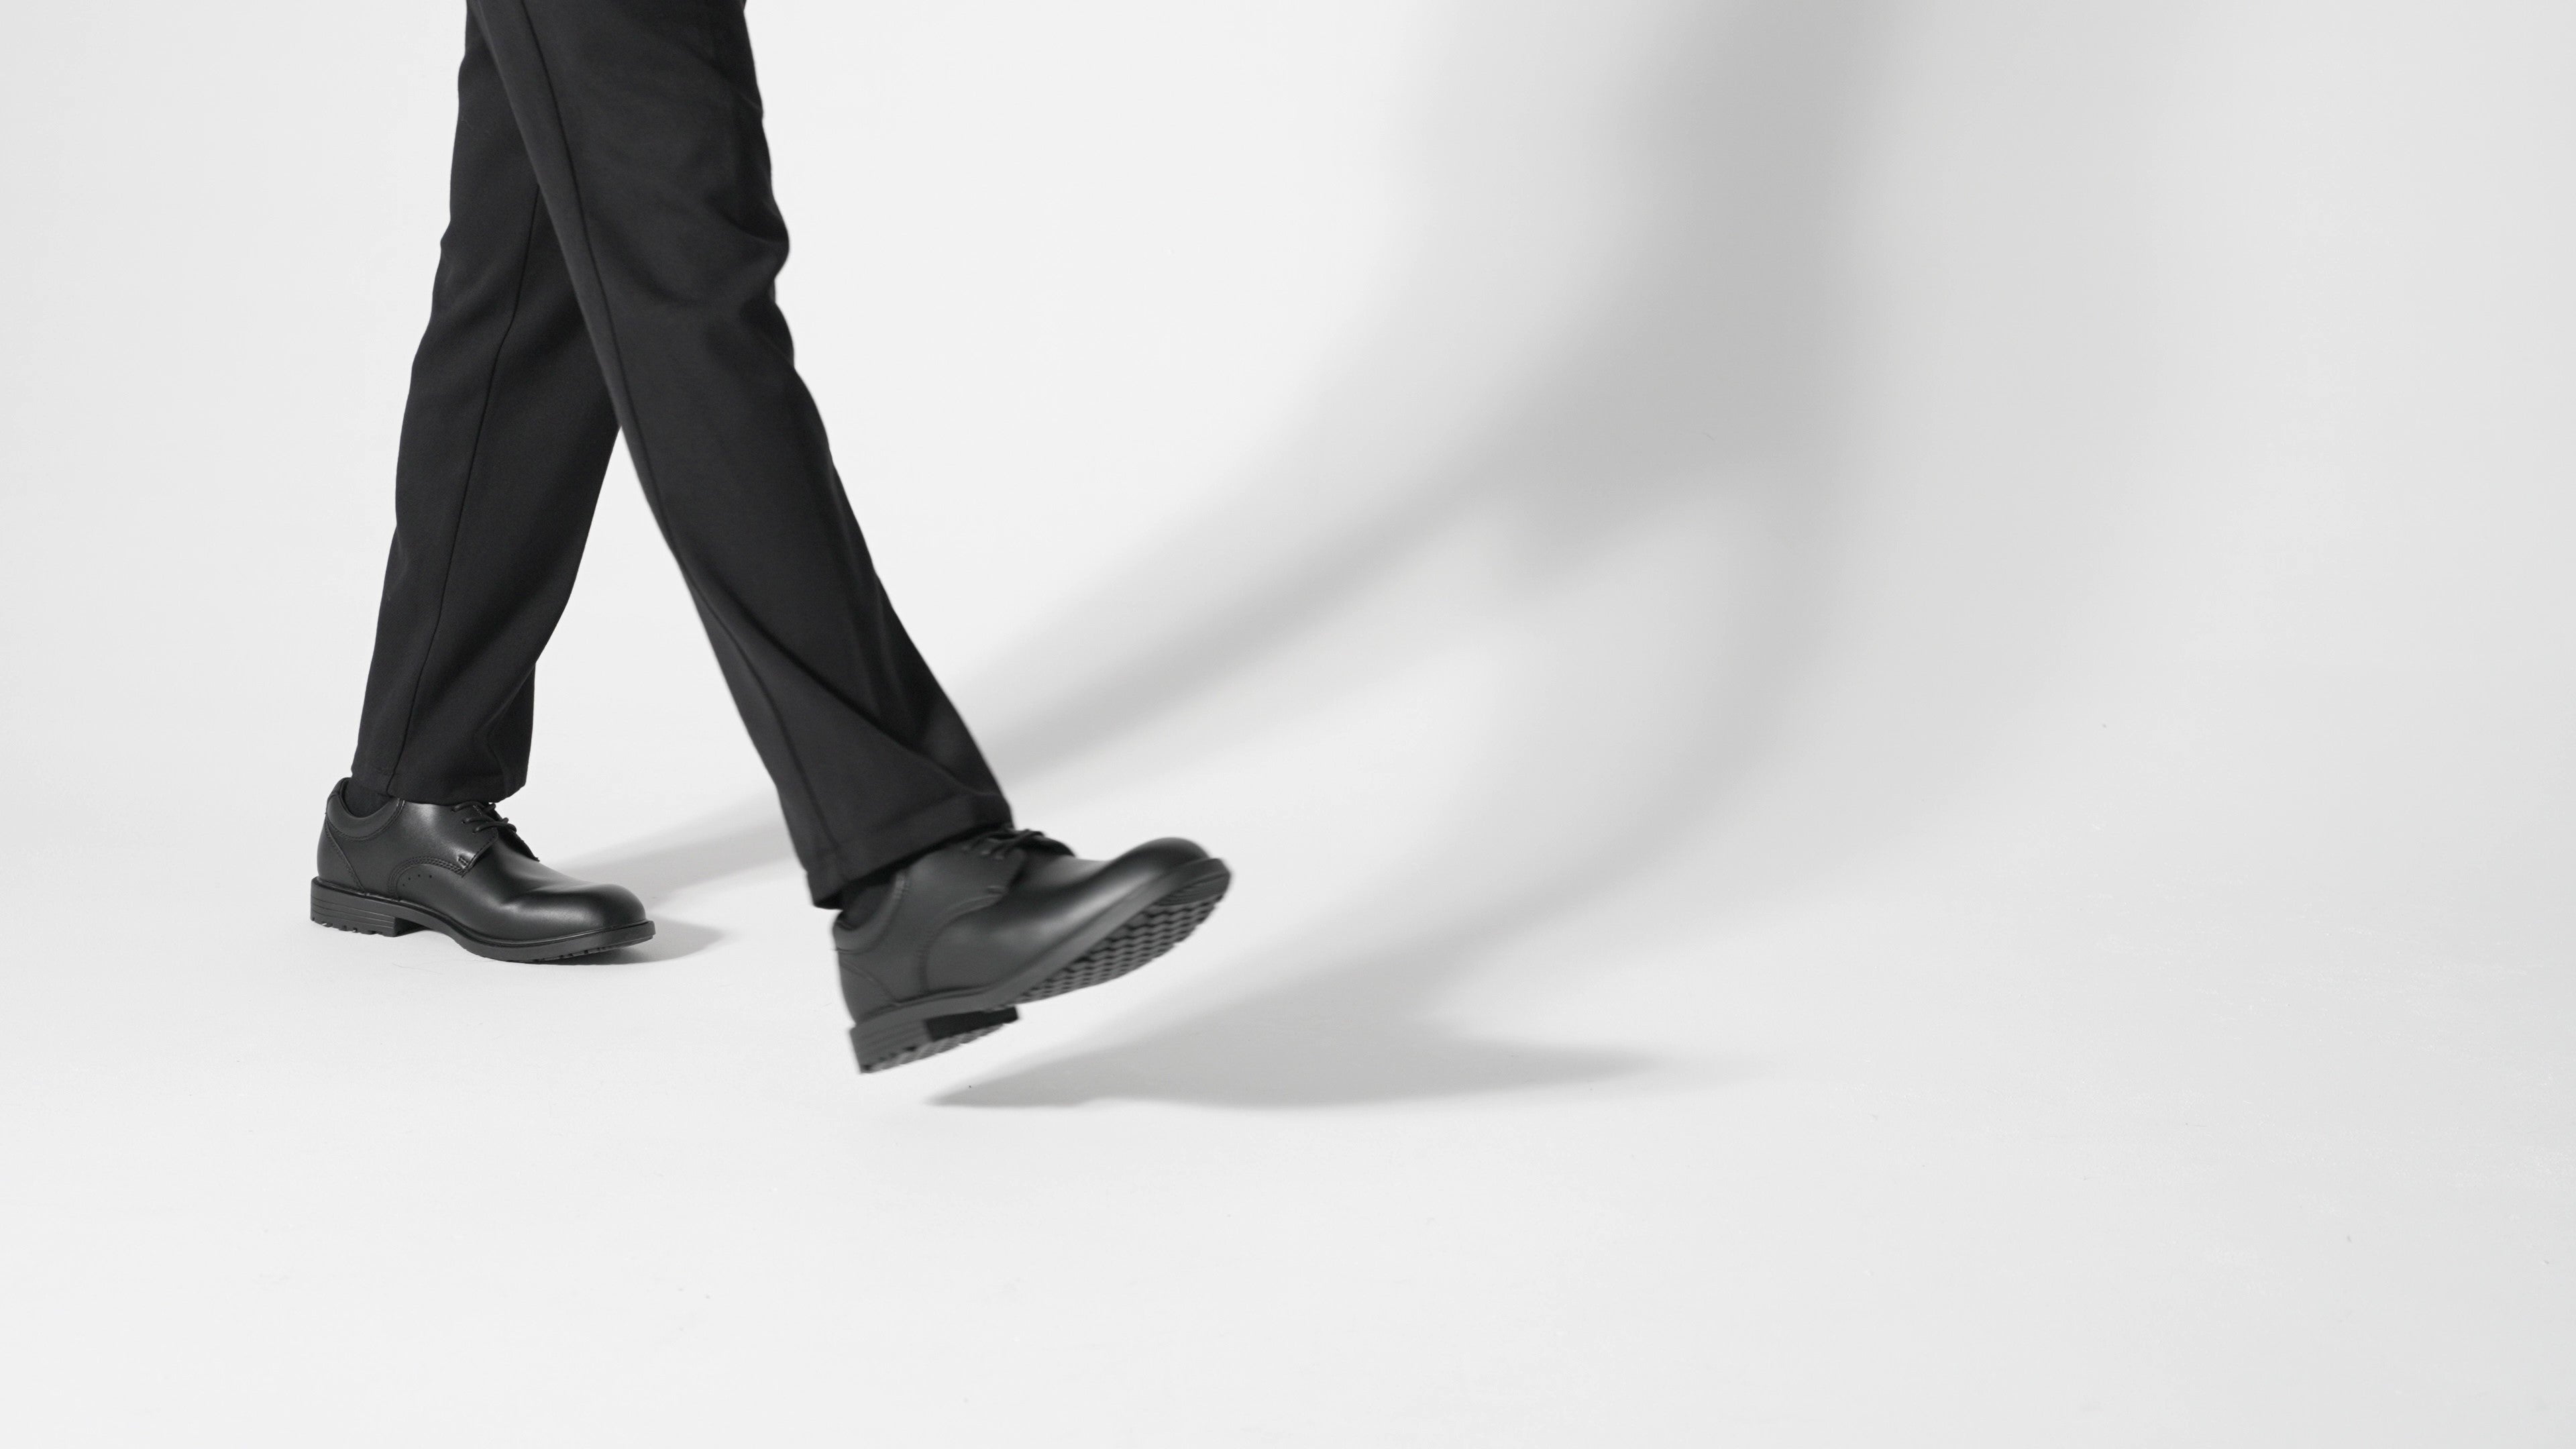 The Shoes for Crews Cambridge III is a slip-resistant leather dress shoe, with removable cushioned insoles and a padded comfort collar, product video.